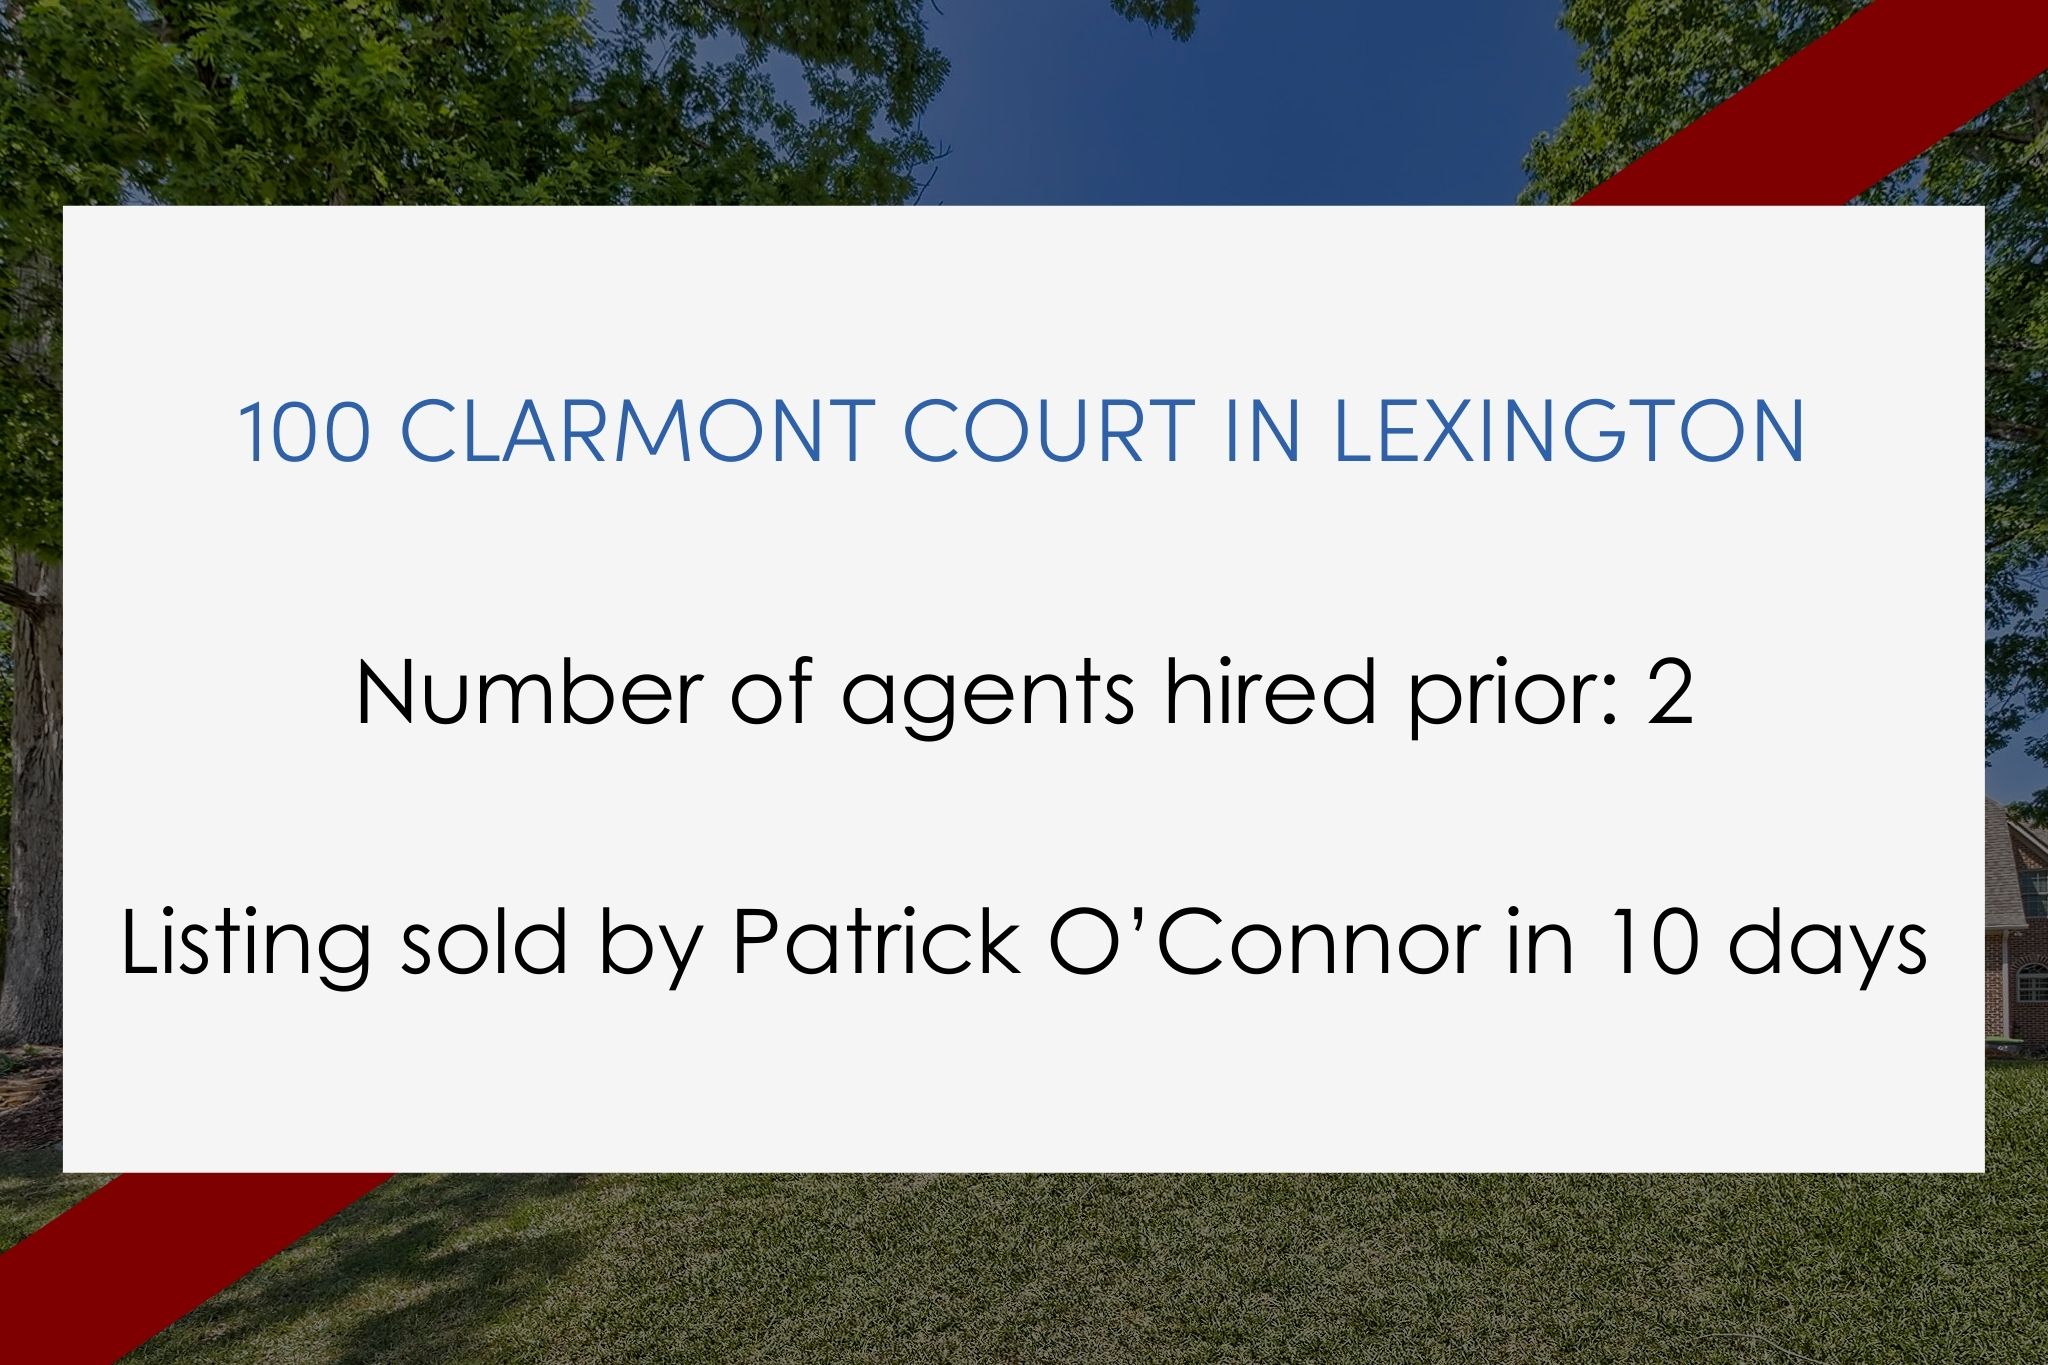 Number of agents hired prior: 2. Listing sold by Patrick O’Connor in 10 days.